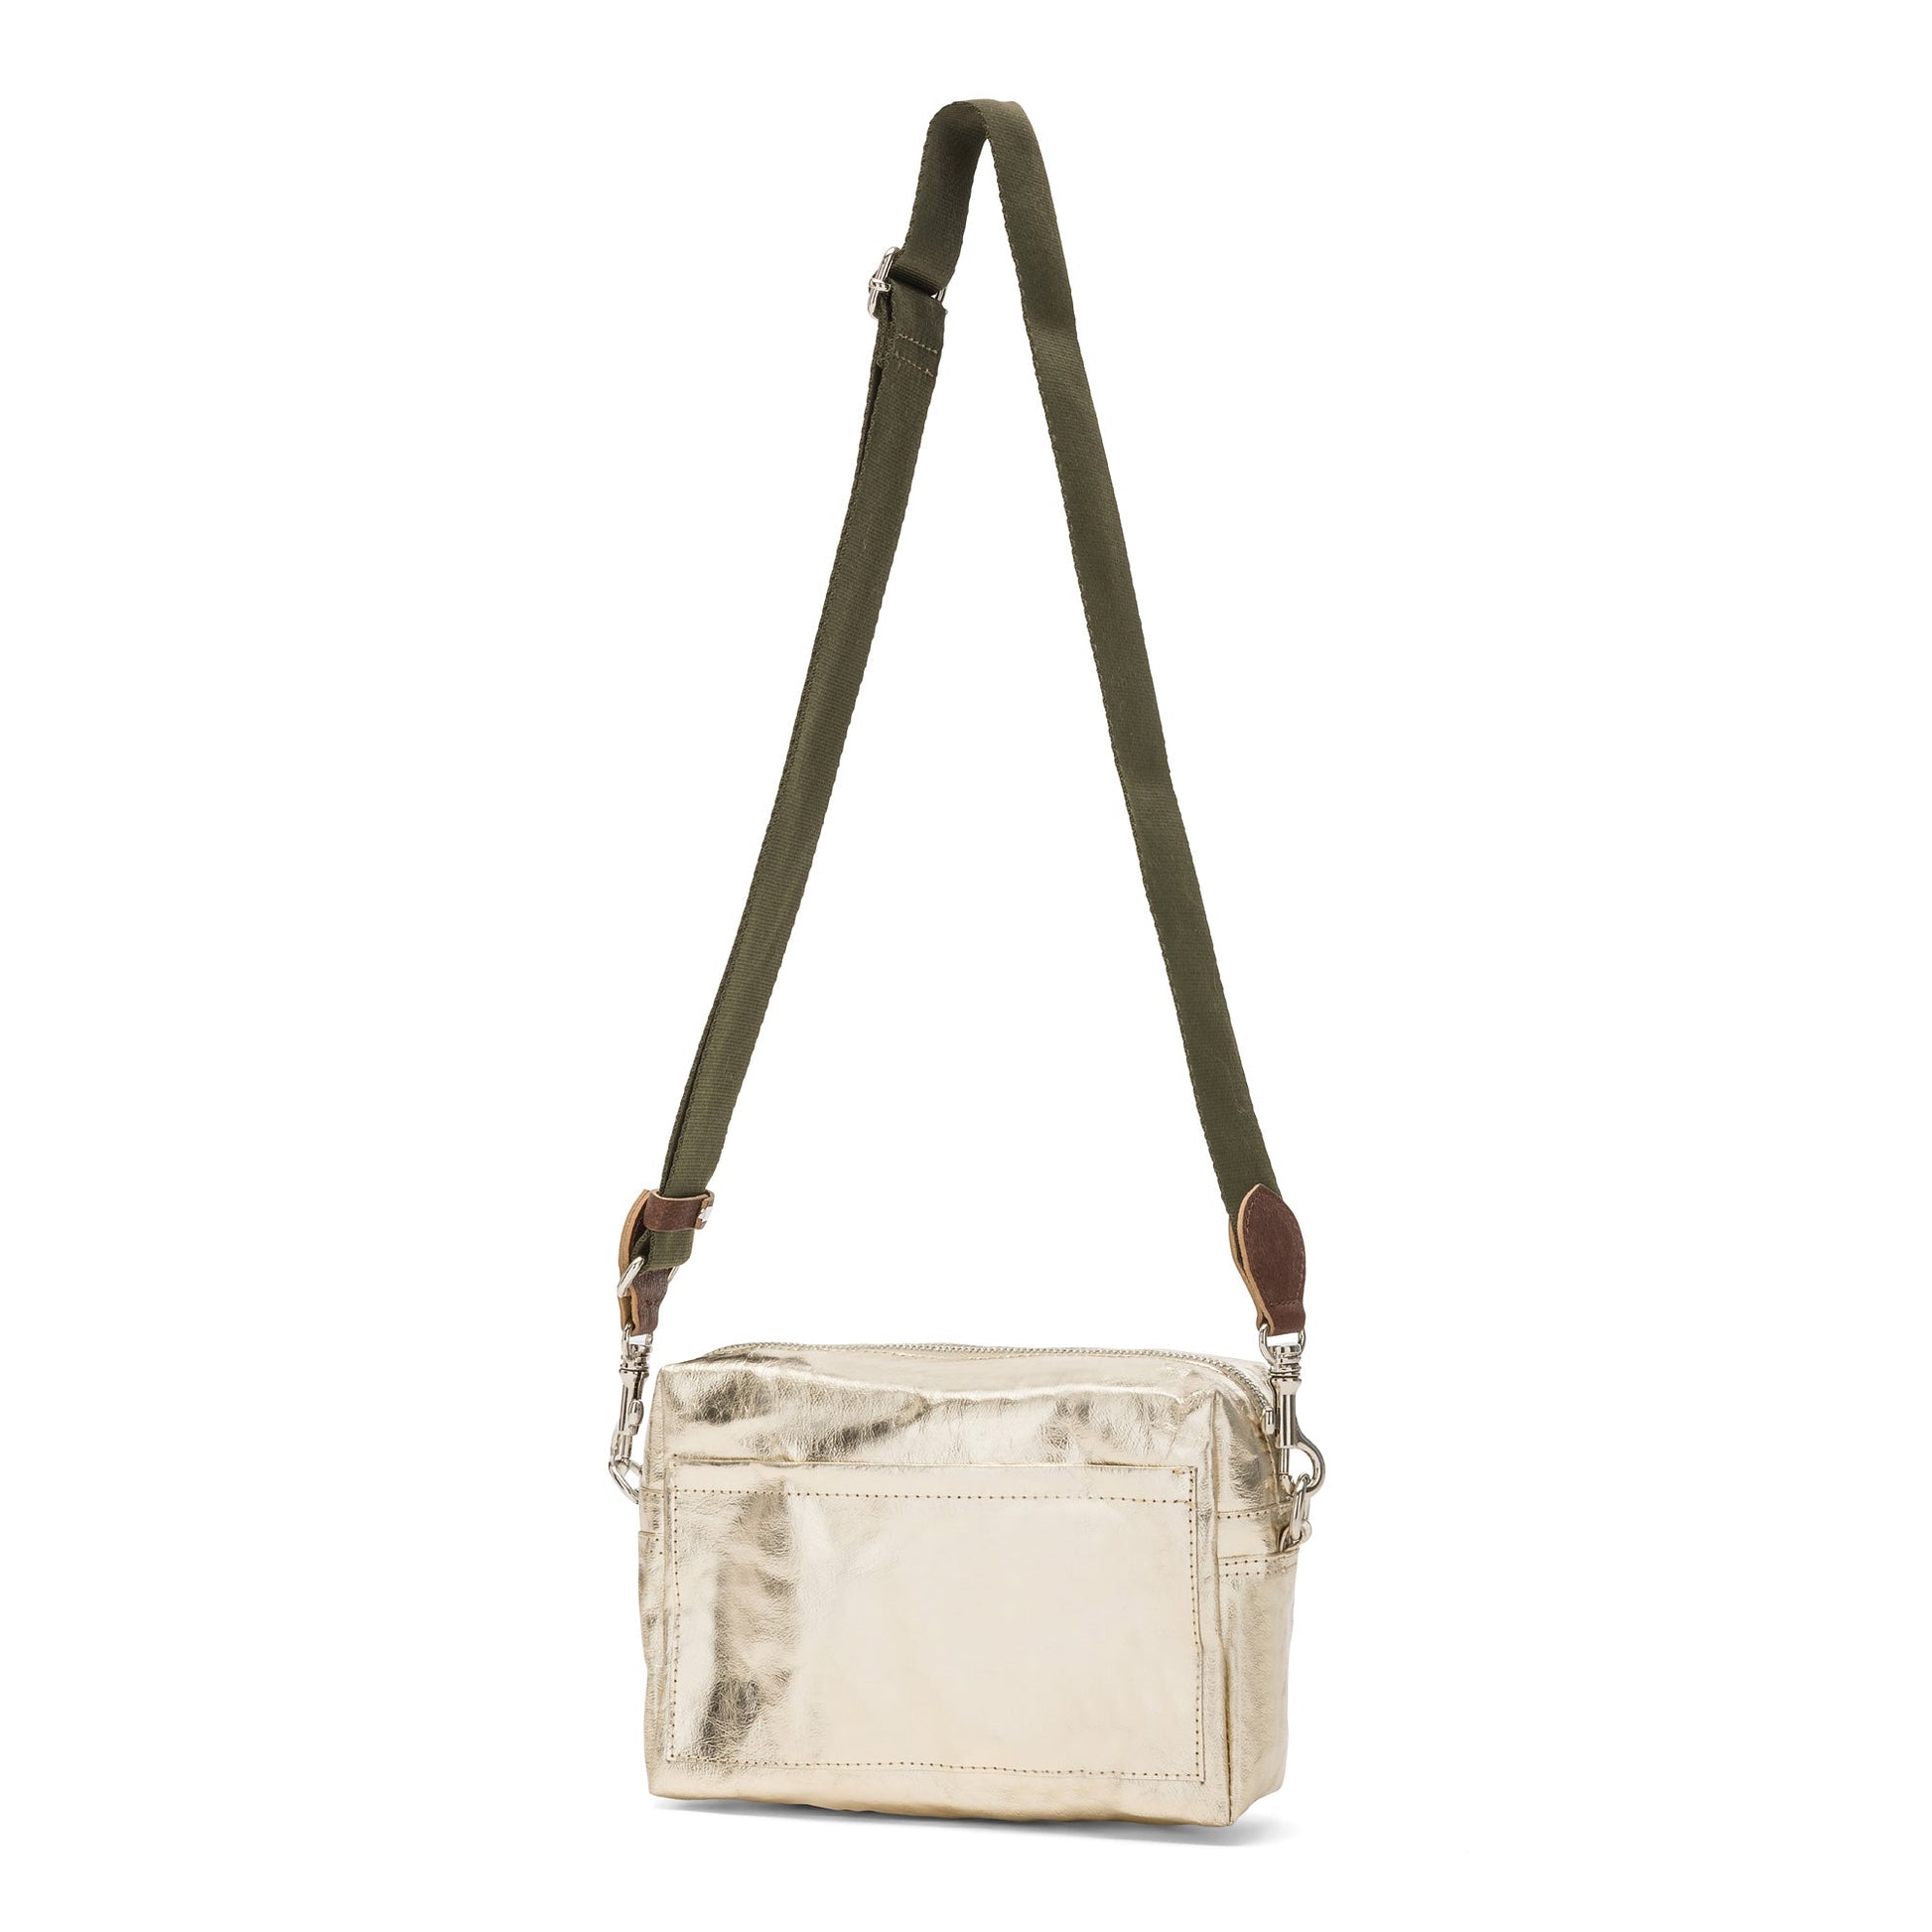 A rectangular washable paper handbag with an external side pocket is shown. The bag has a canvas strap, washable paper details and metal fastening clips to attach the straps to the bag. The bag closes by a zip. The bag shown is metallic platinum with an olive strap.